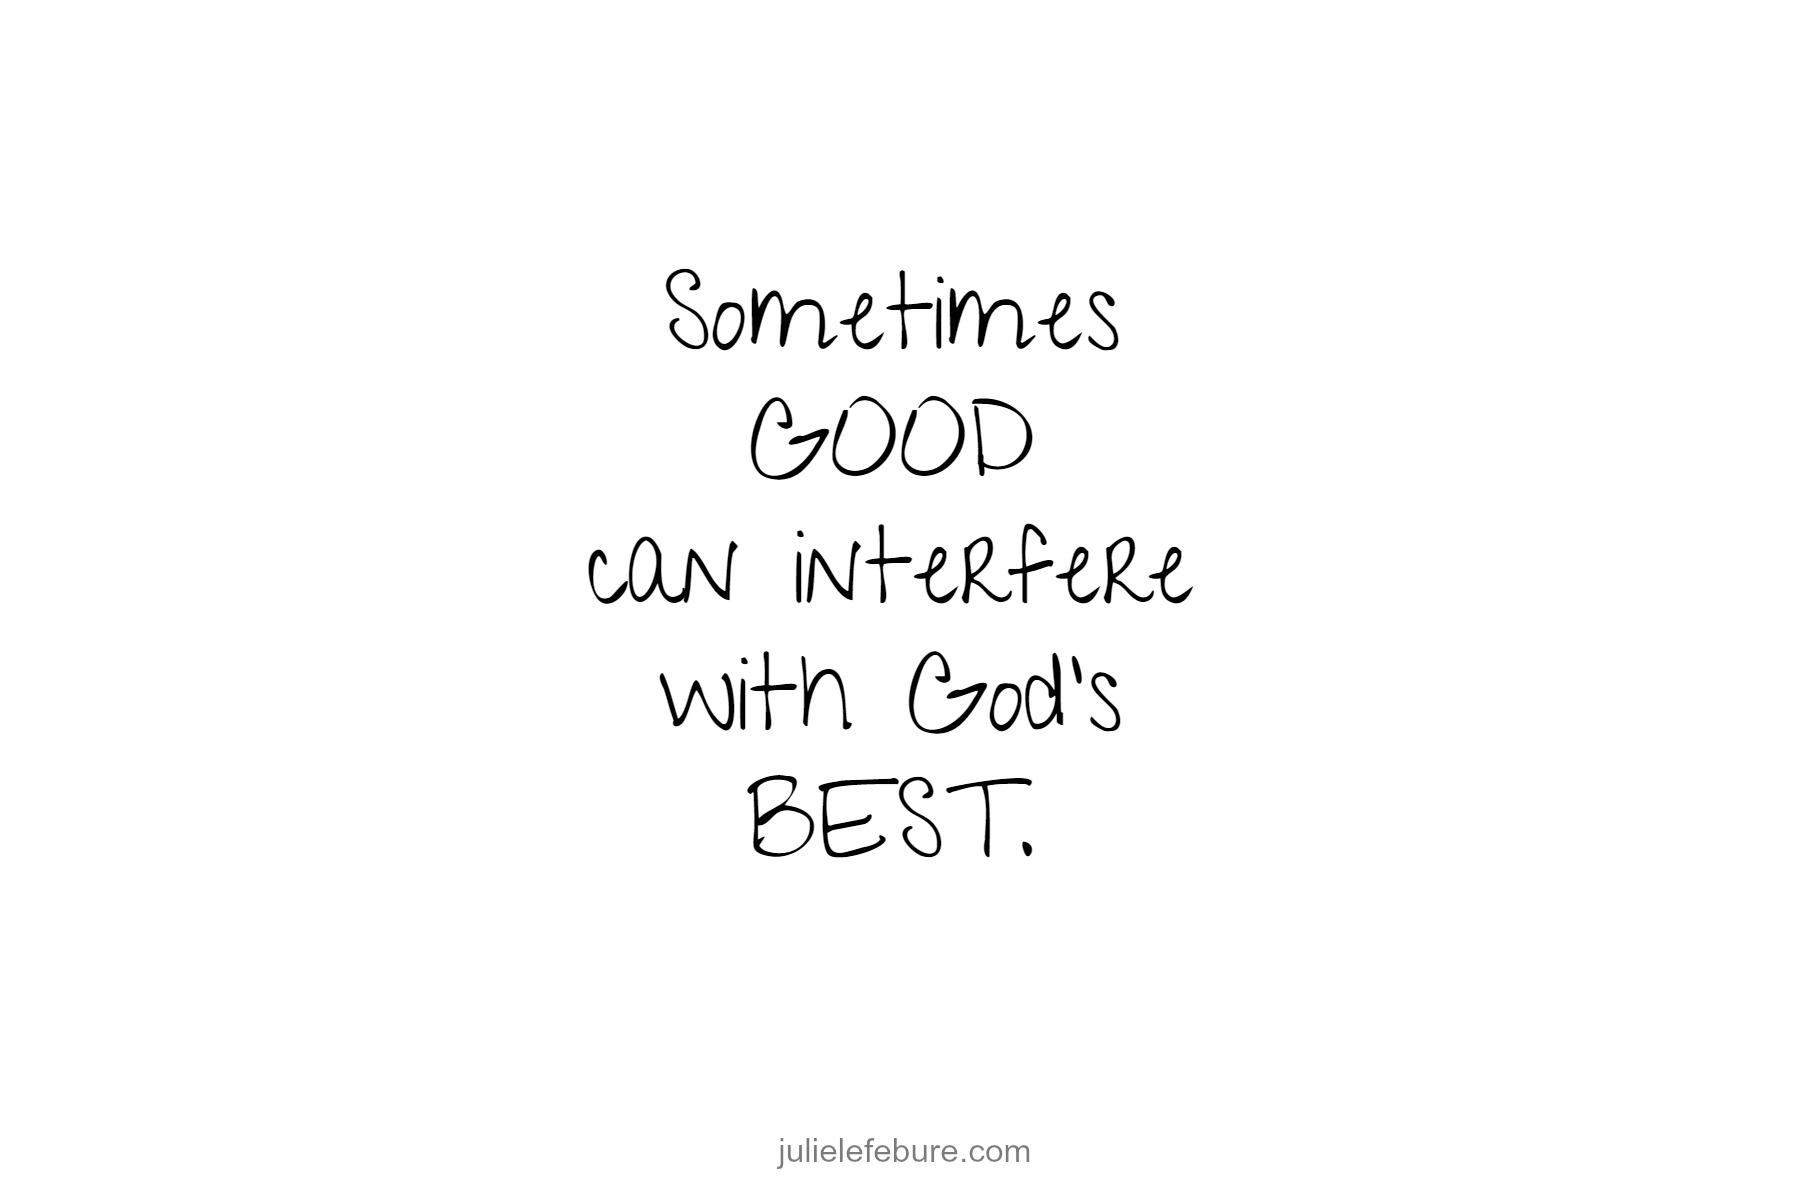 When Good Interferes With God’s Best